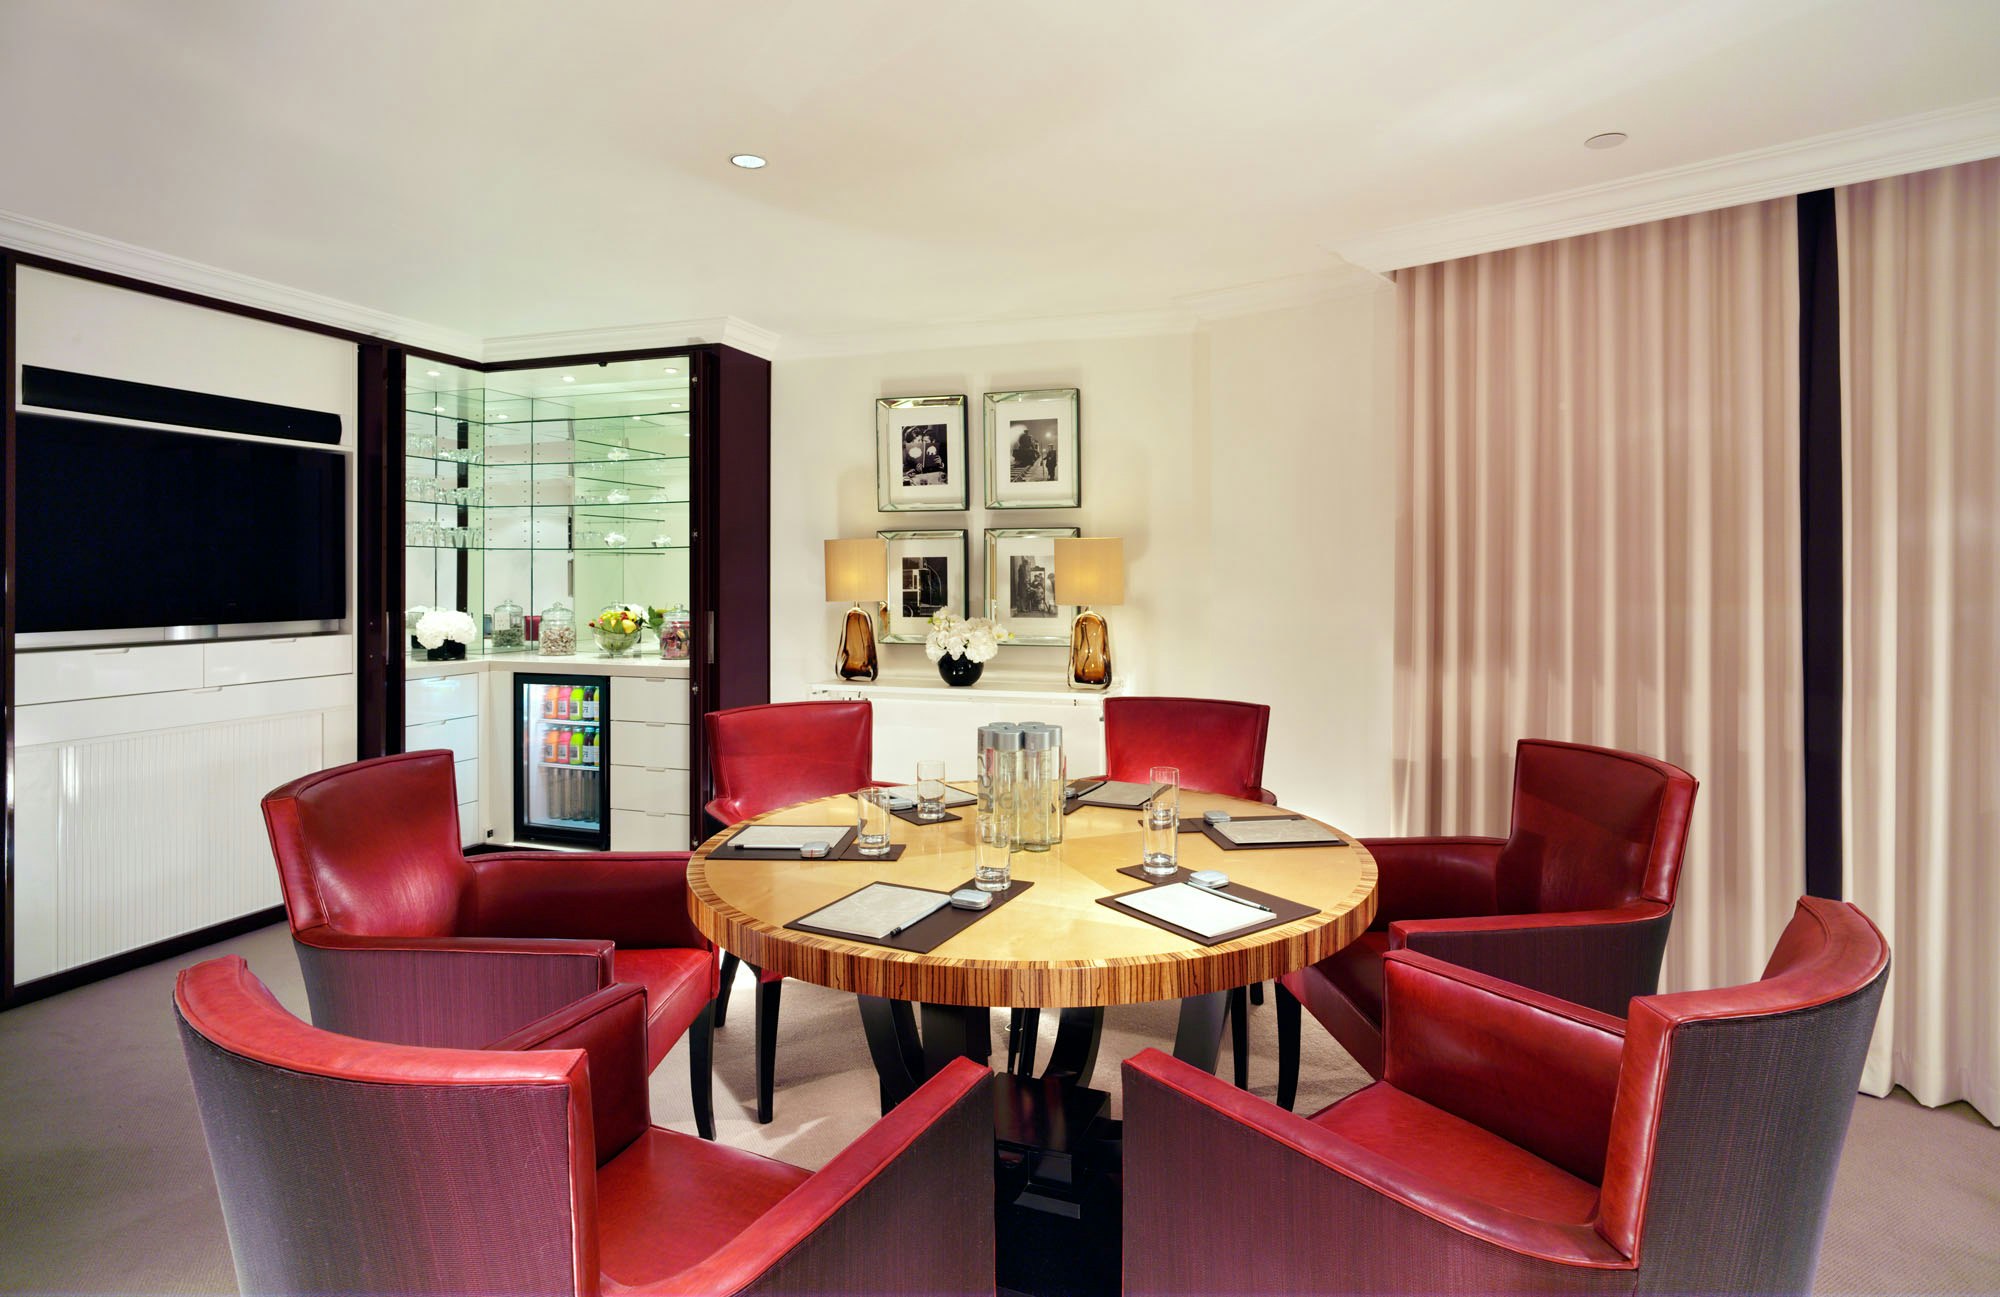 The Dorchester - Meeting rooms image 2